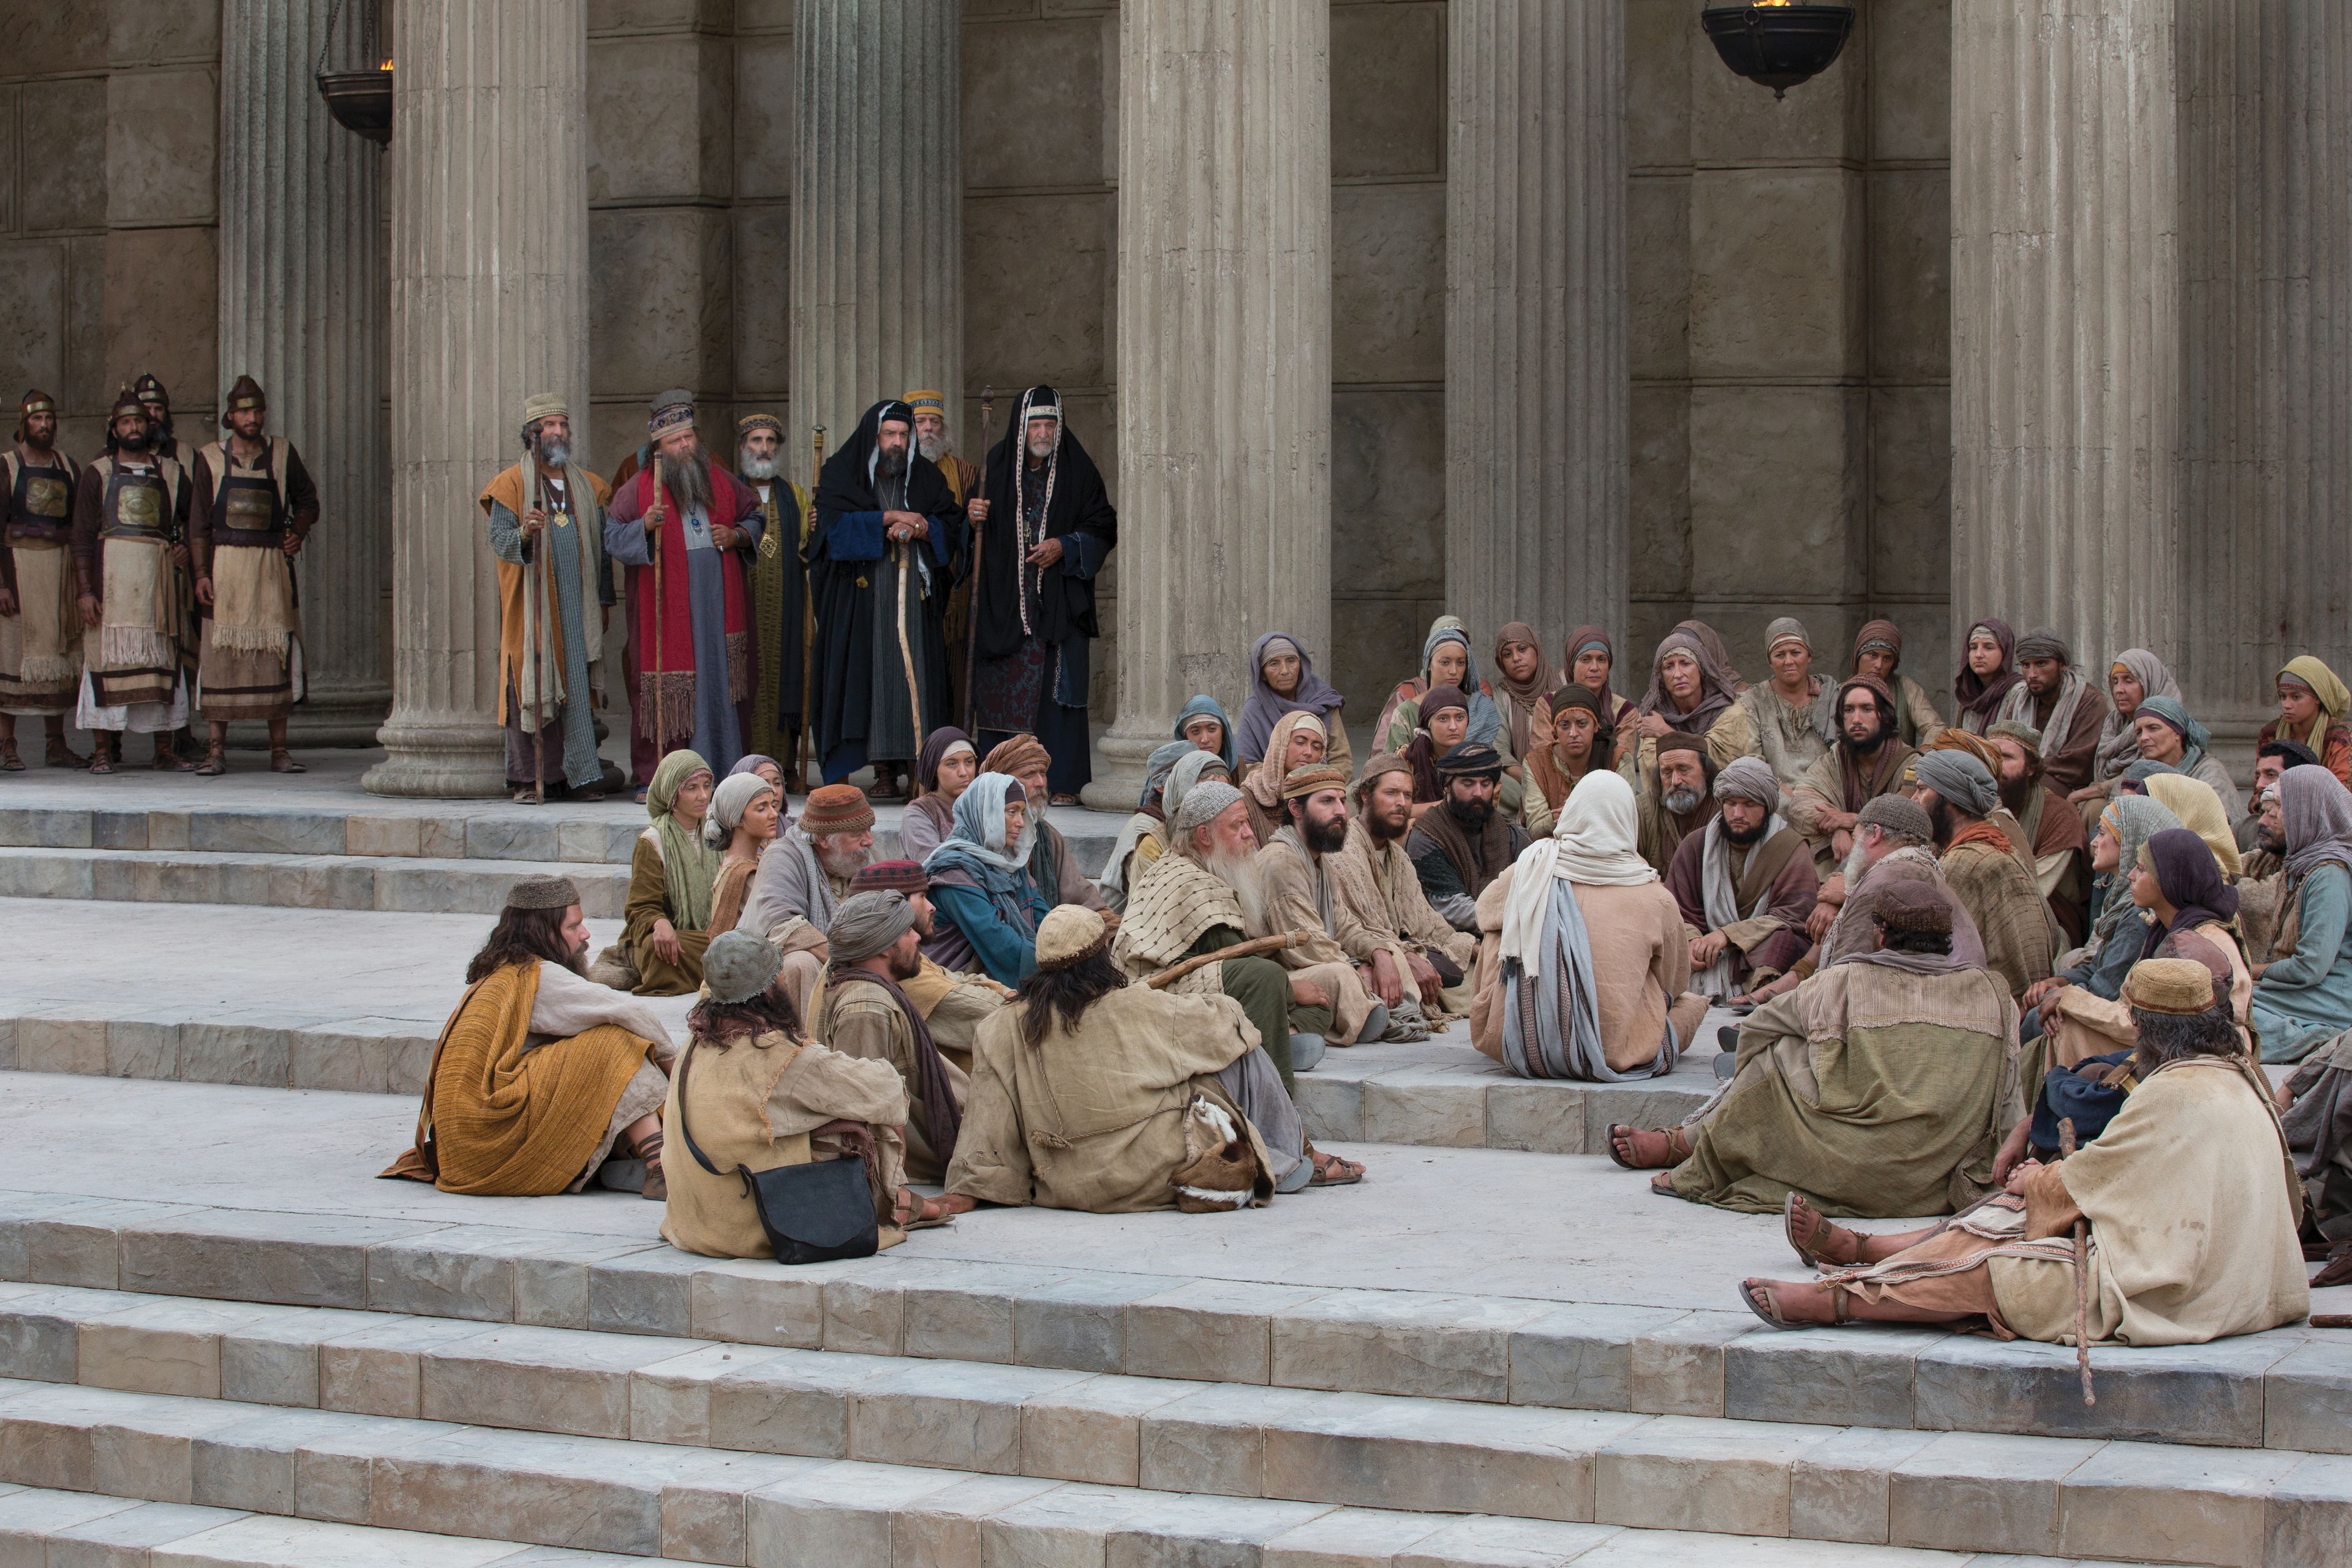 Jesus teaches on the steps of the temple.